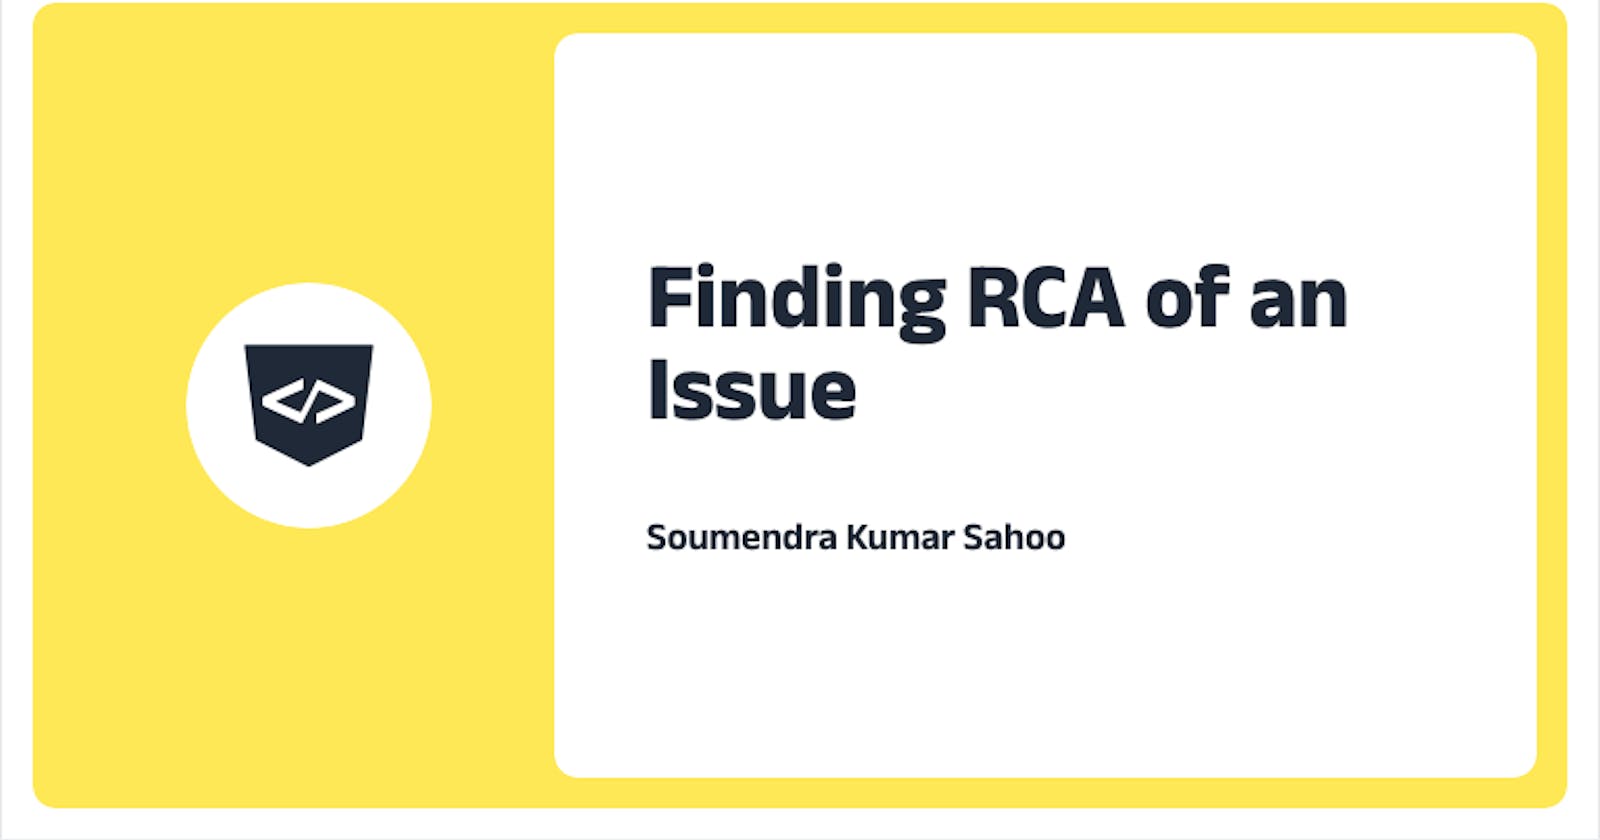 Finding RCA of an Issue